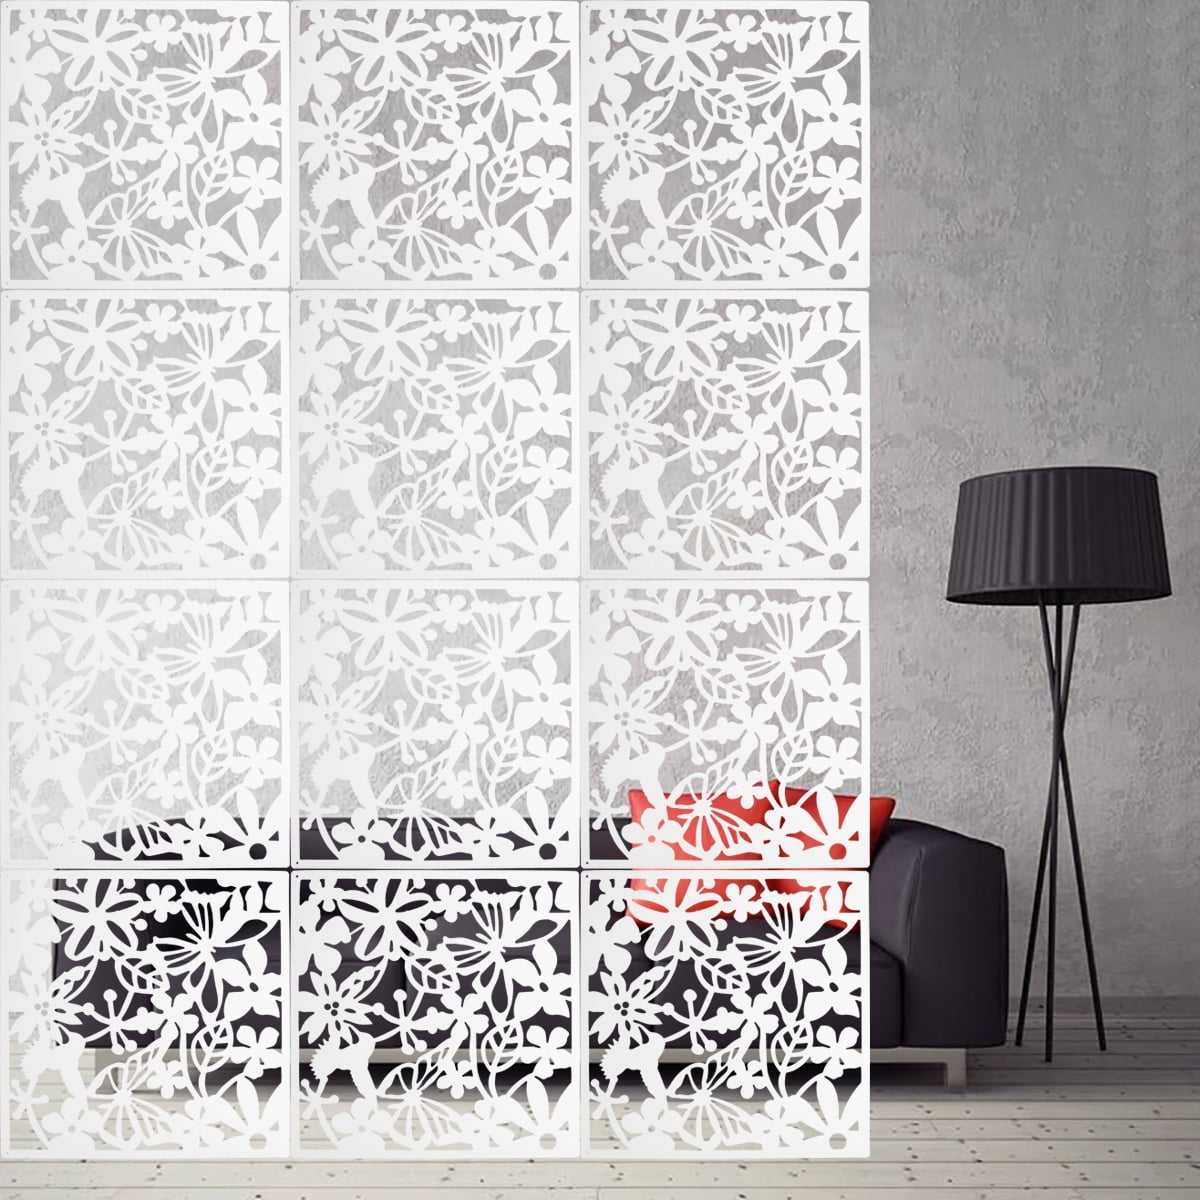 Details about   12Pcs Room Divider Folding Privacy Hanging Screens Room Office DIY Decor White 